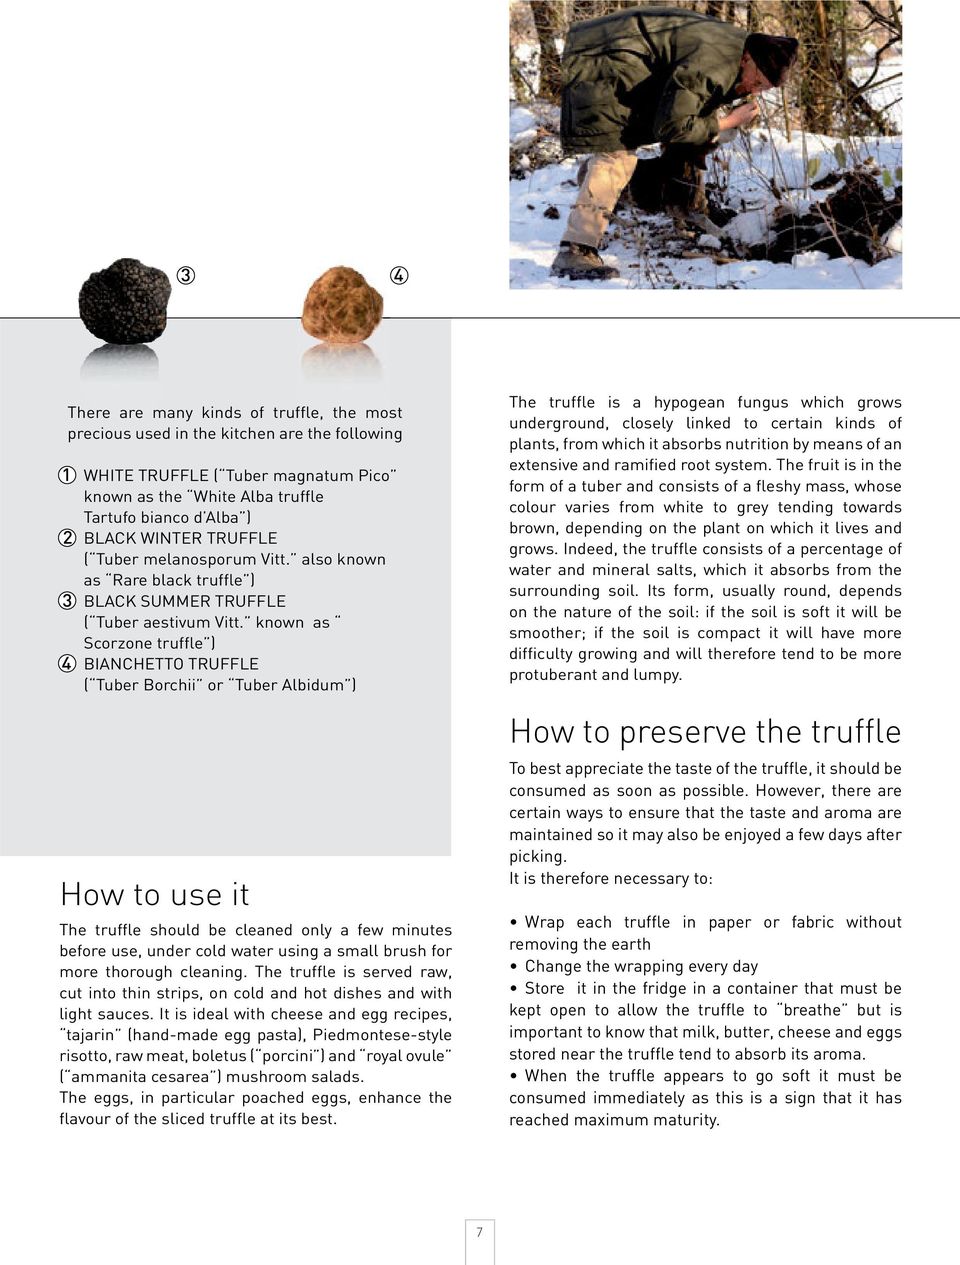 known as Scorzone truffle ) 4 BIANCHETTO TRUFFLE ( Tuber Borchii or Tuber Albidum ) How to use it The truffle should be cleaned only a few minutes before use, under cold water using a small brush for